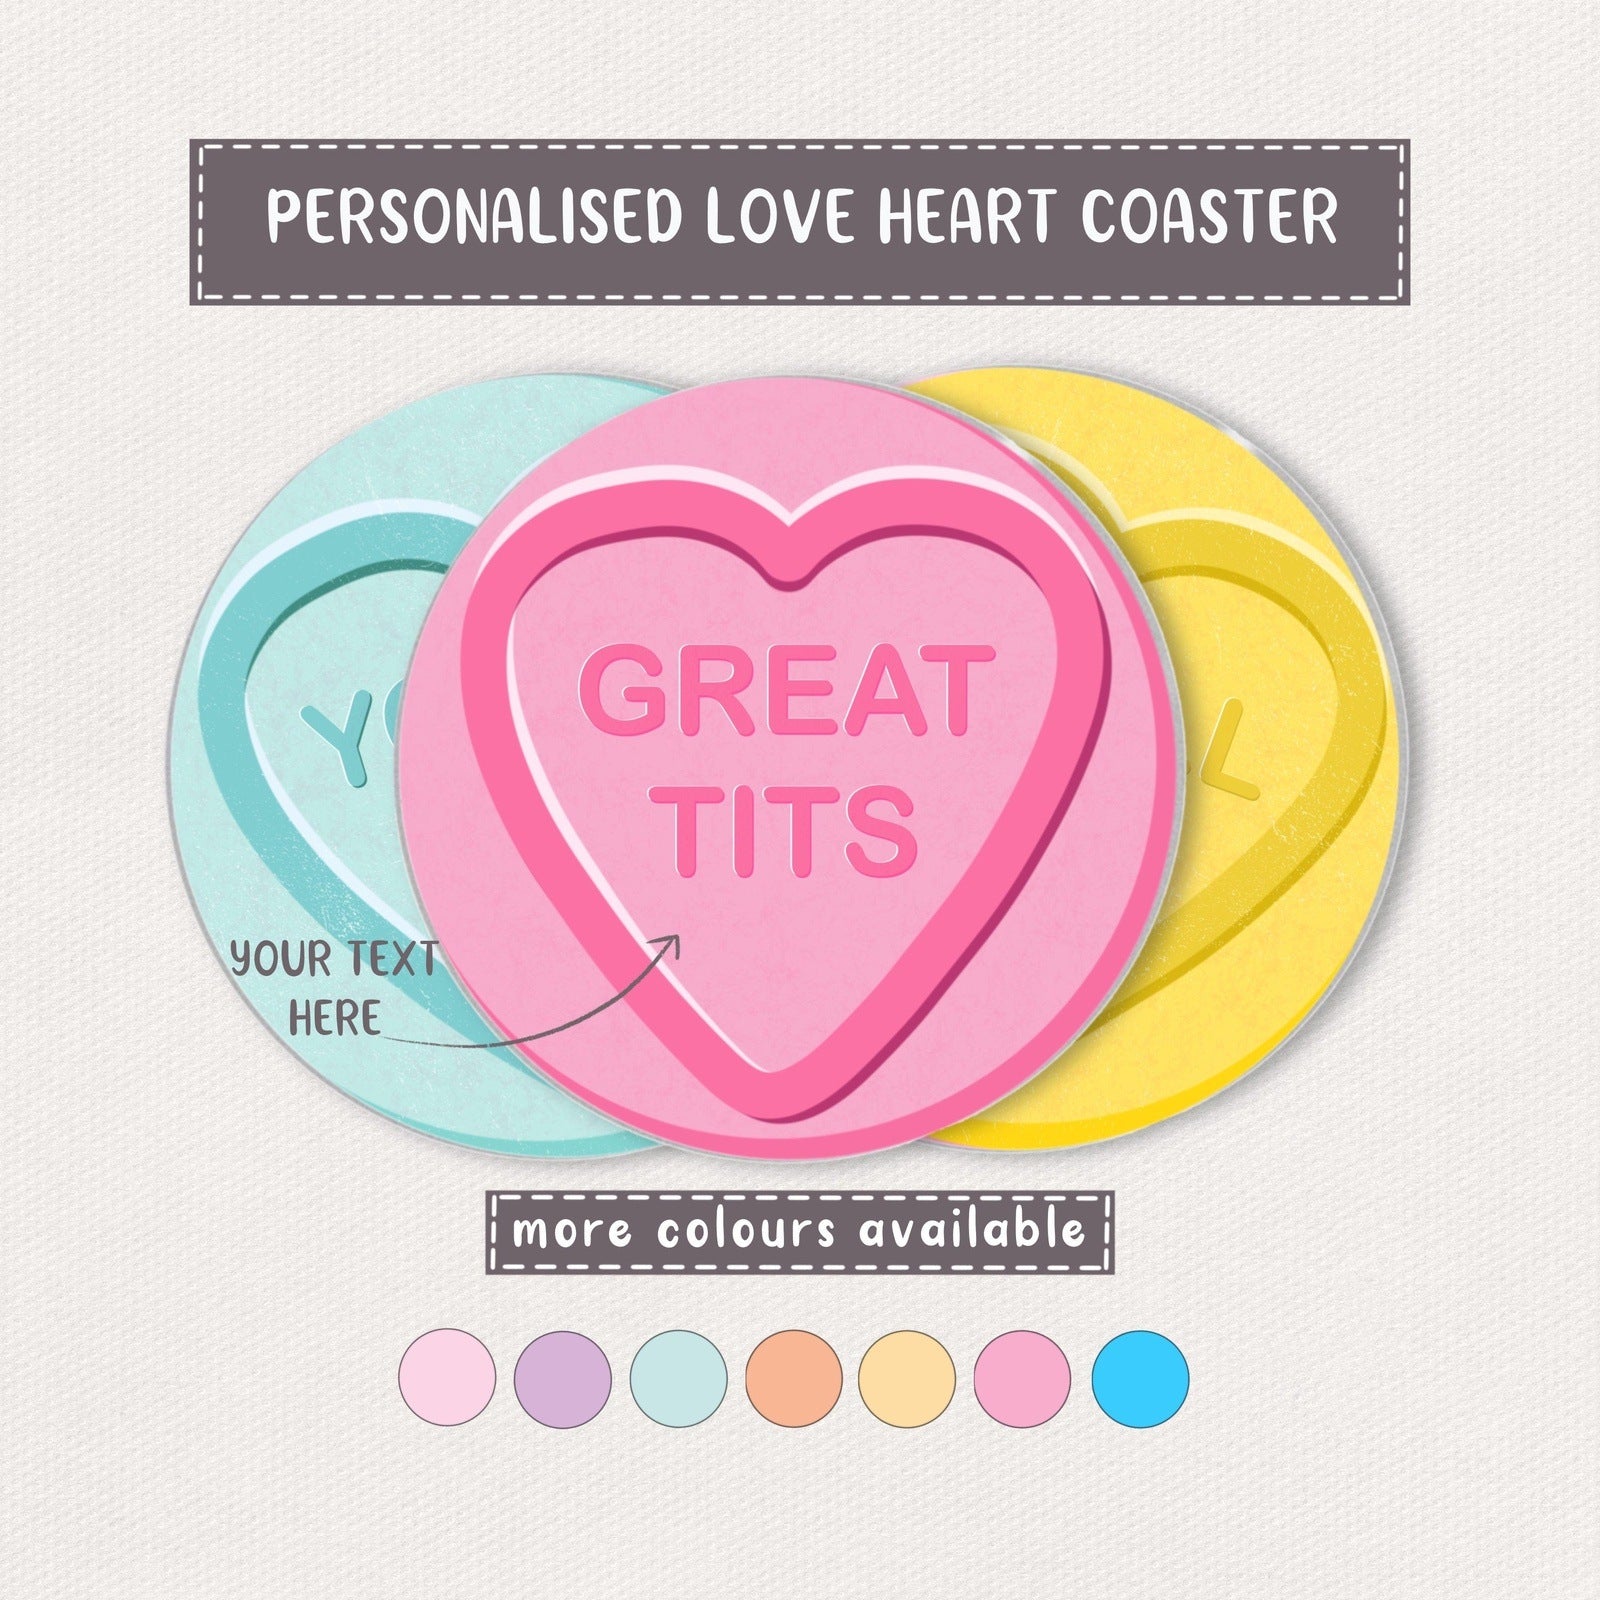 "Great Tits" Personalised Love Heart Coaster